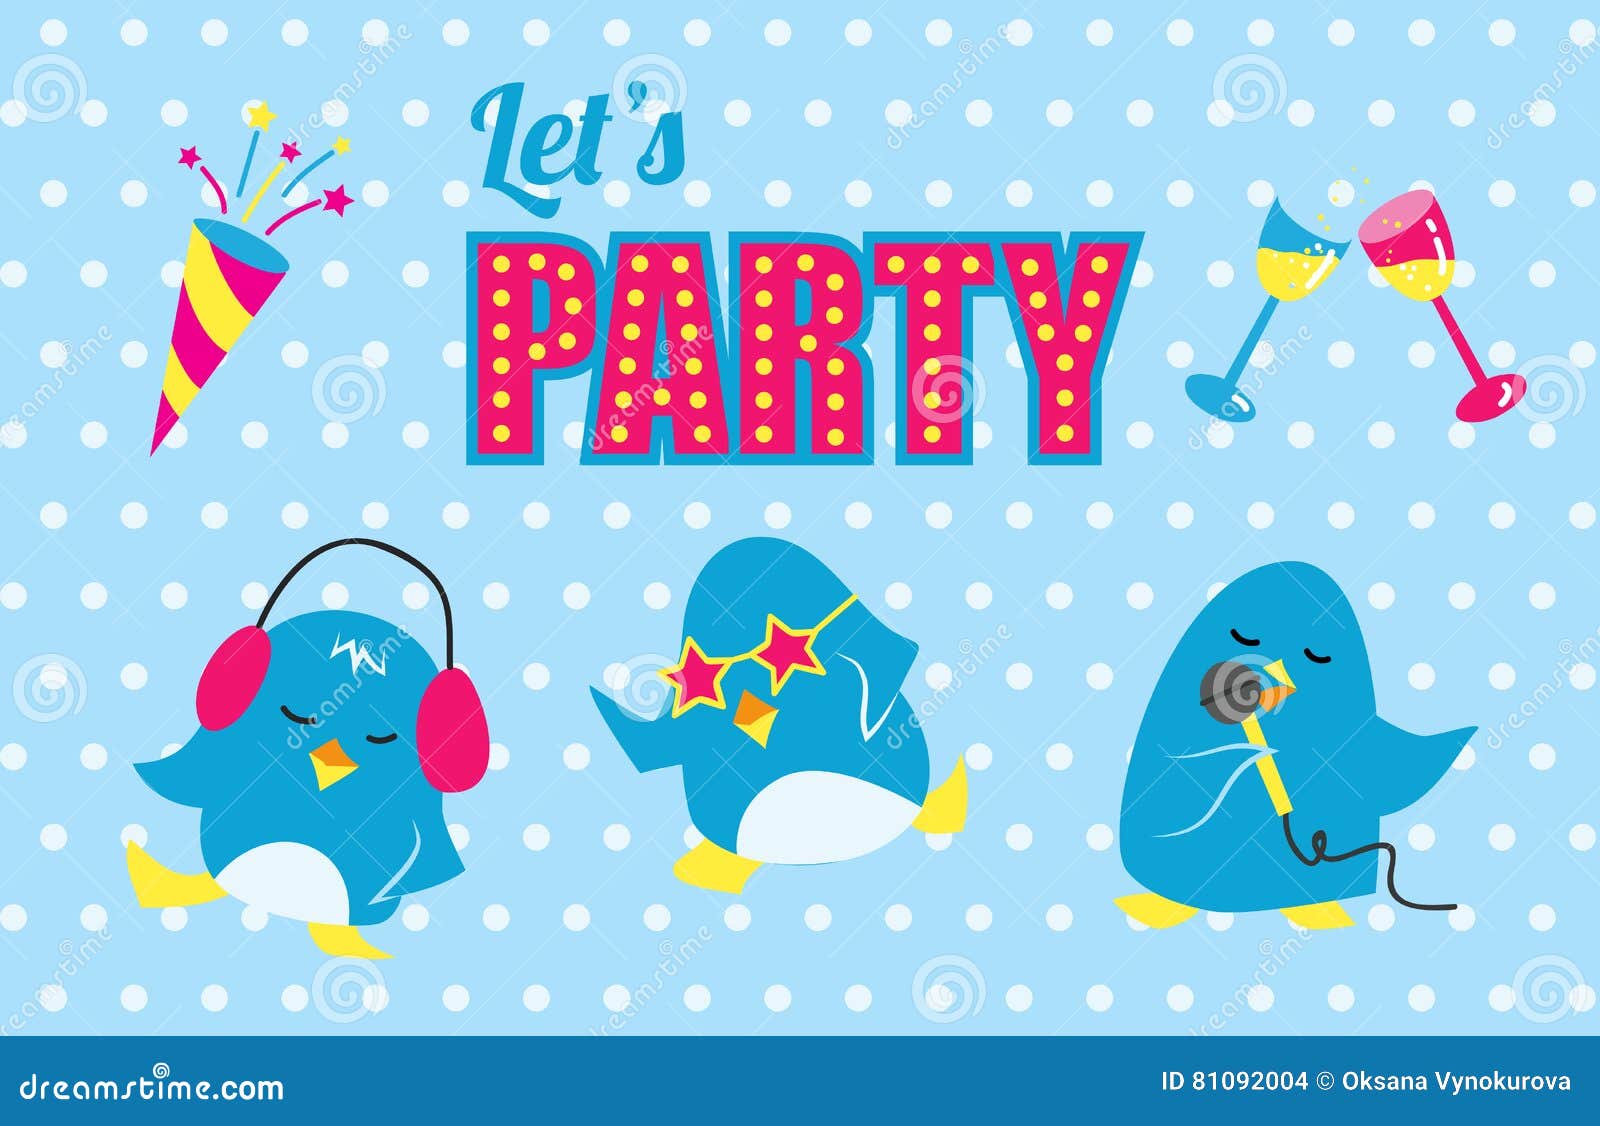 Lets party vector poster stock vector. Illustration of funny - 81092004